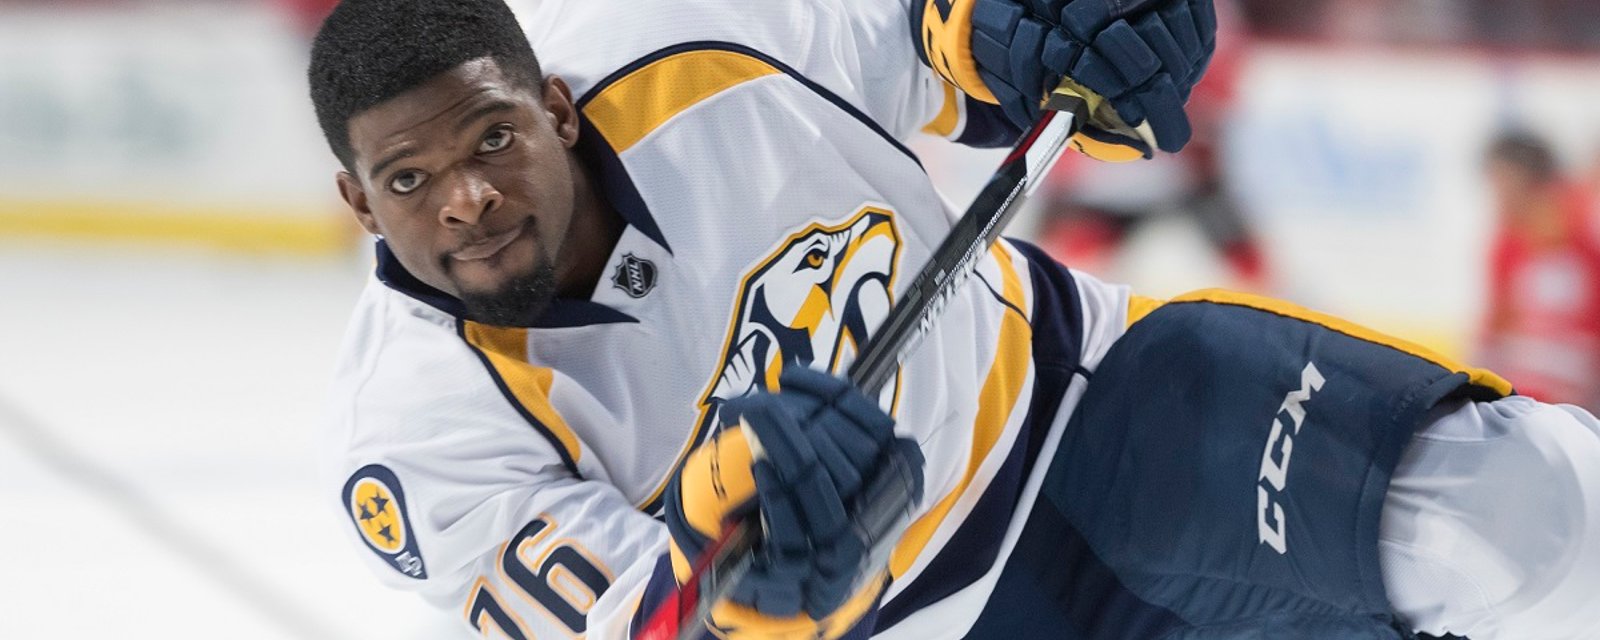 Subban remains injured as match up against Montreal draws close.